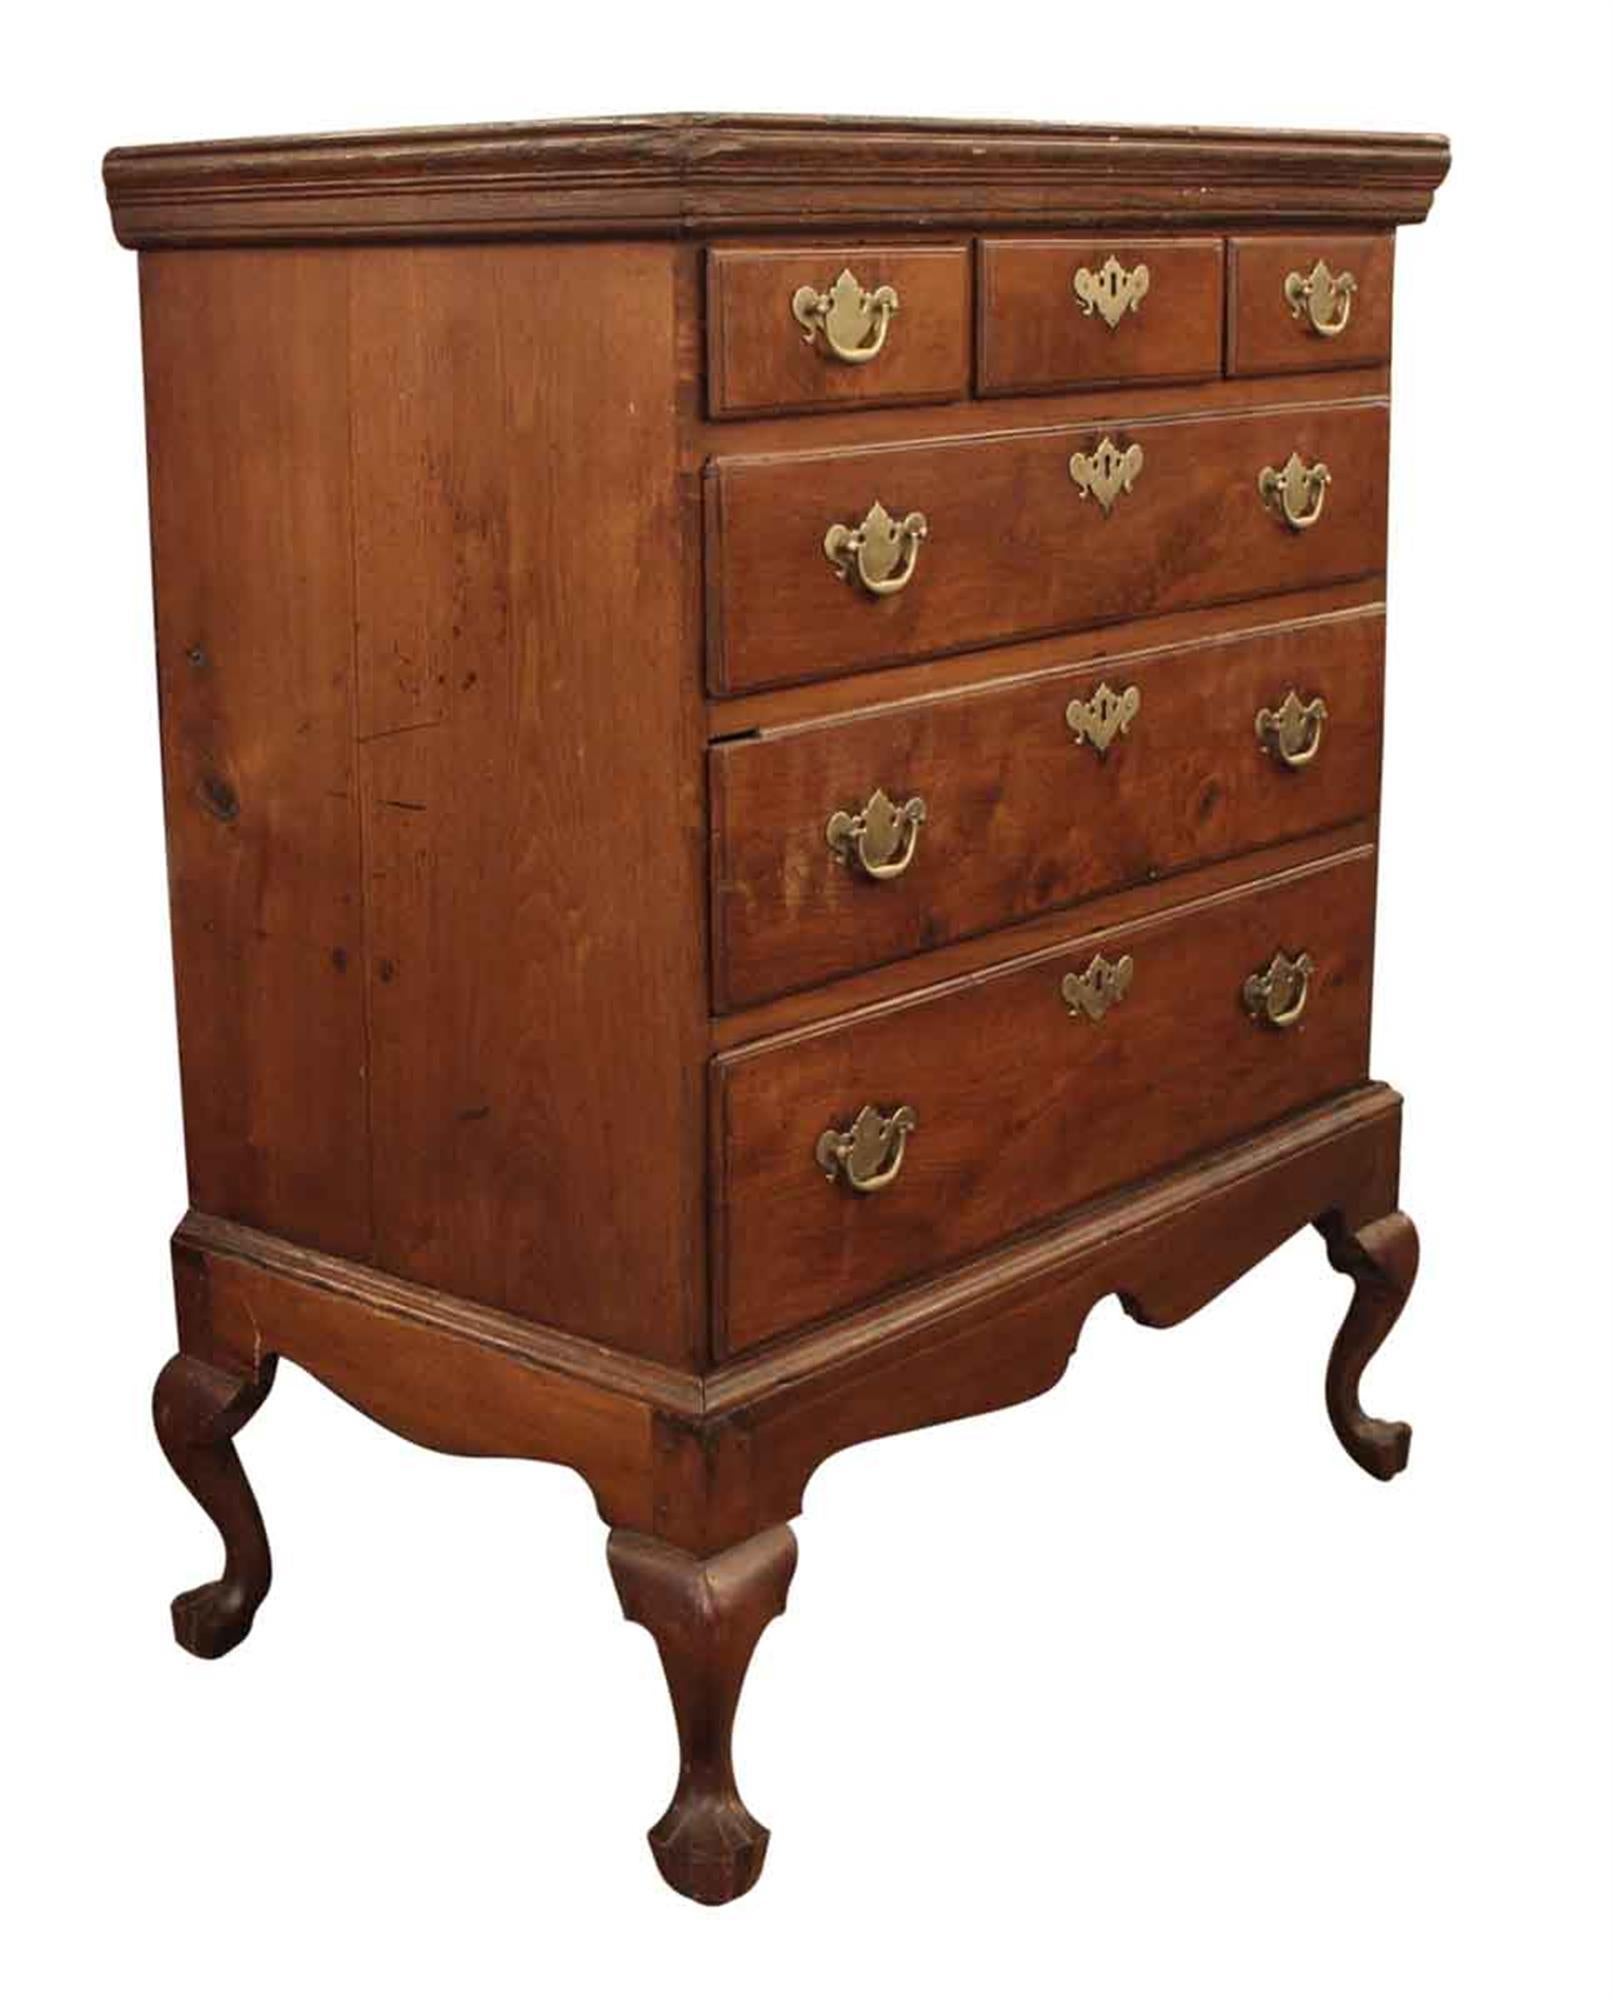 Wooden highboy dresser with six drawers. This charming piece has a nice patina and Chippendale hardware. The highboy top has been removed and the item shows some general wear from age and use. This can be seen at our 400 Gilligan St location in